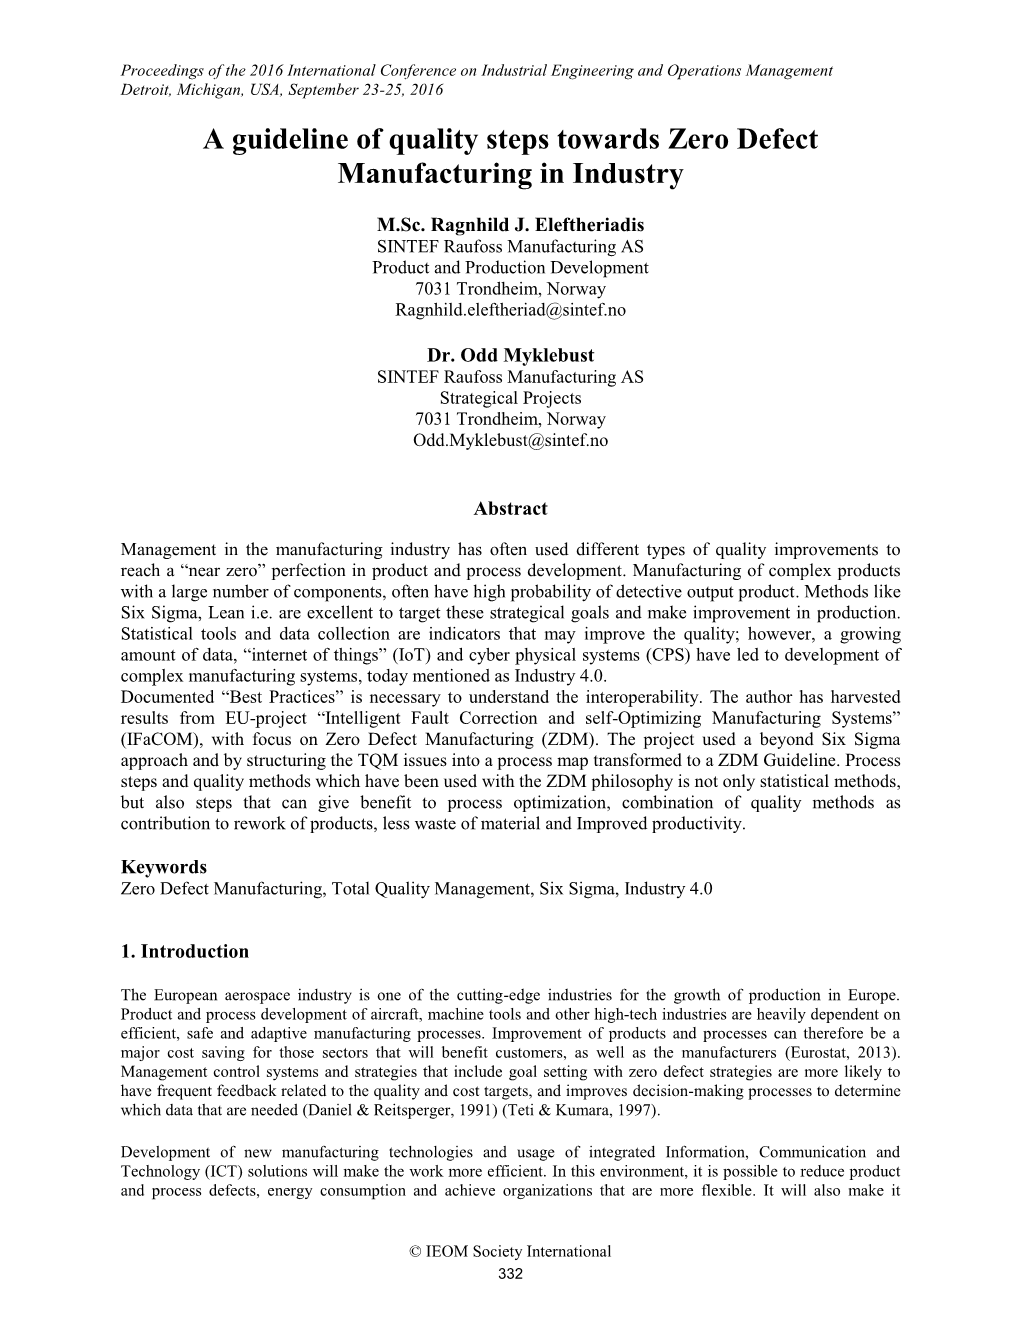 A Guideline of Quality Steps Towards Zero Defect Manufacturing in Industry